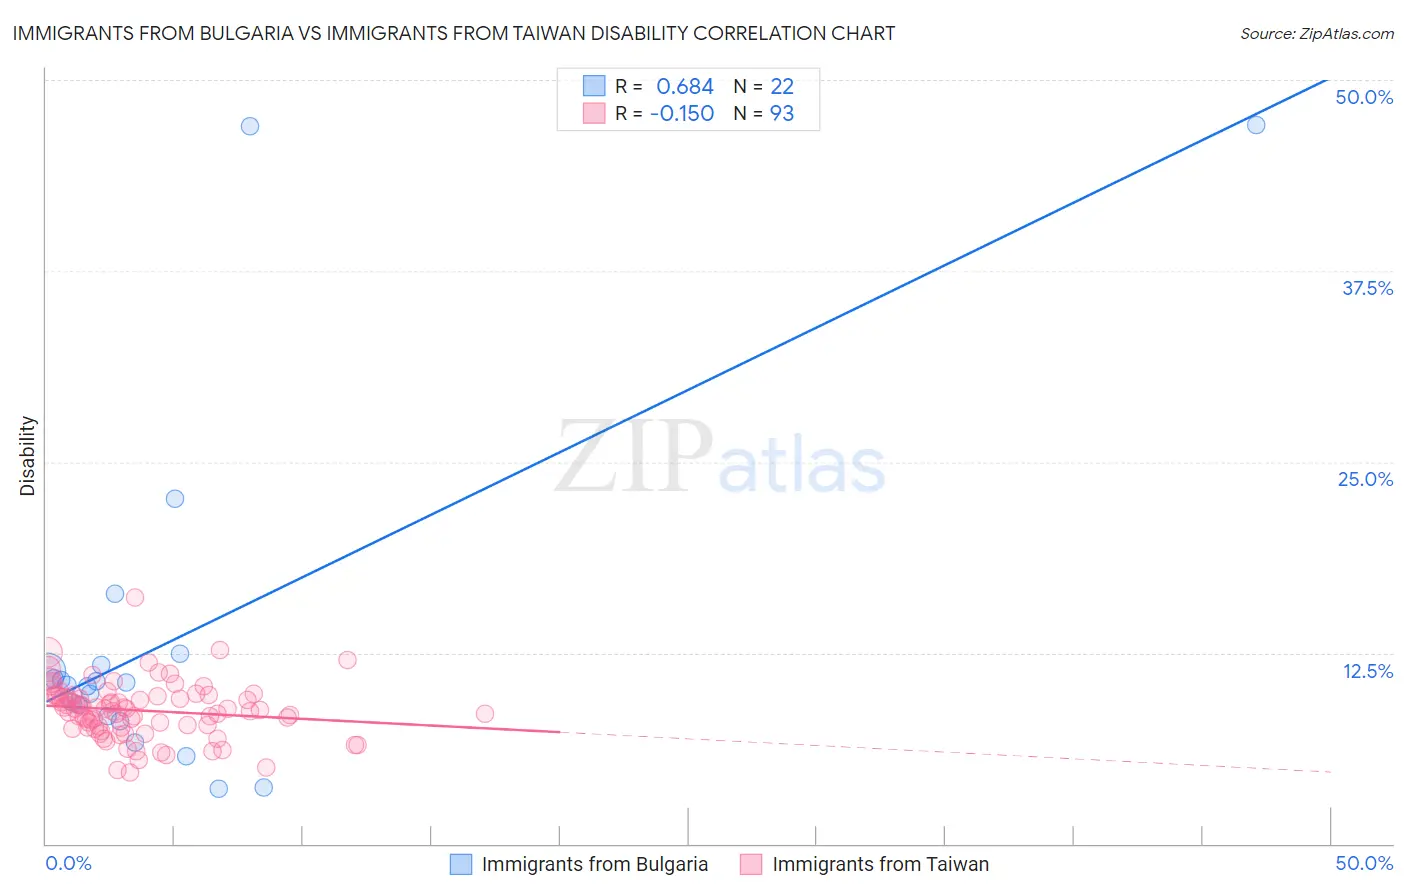 Immigrants from Bulgaria vs Immigrants from Taiwan Disability